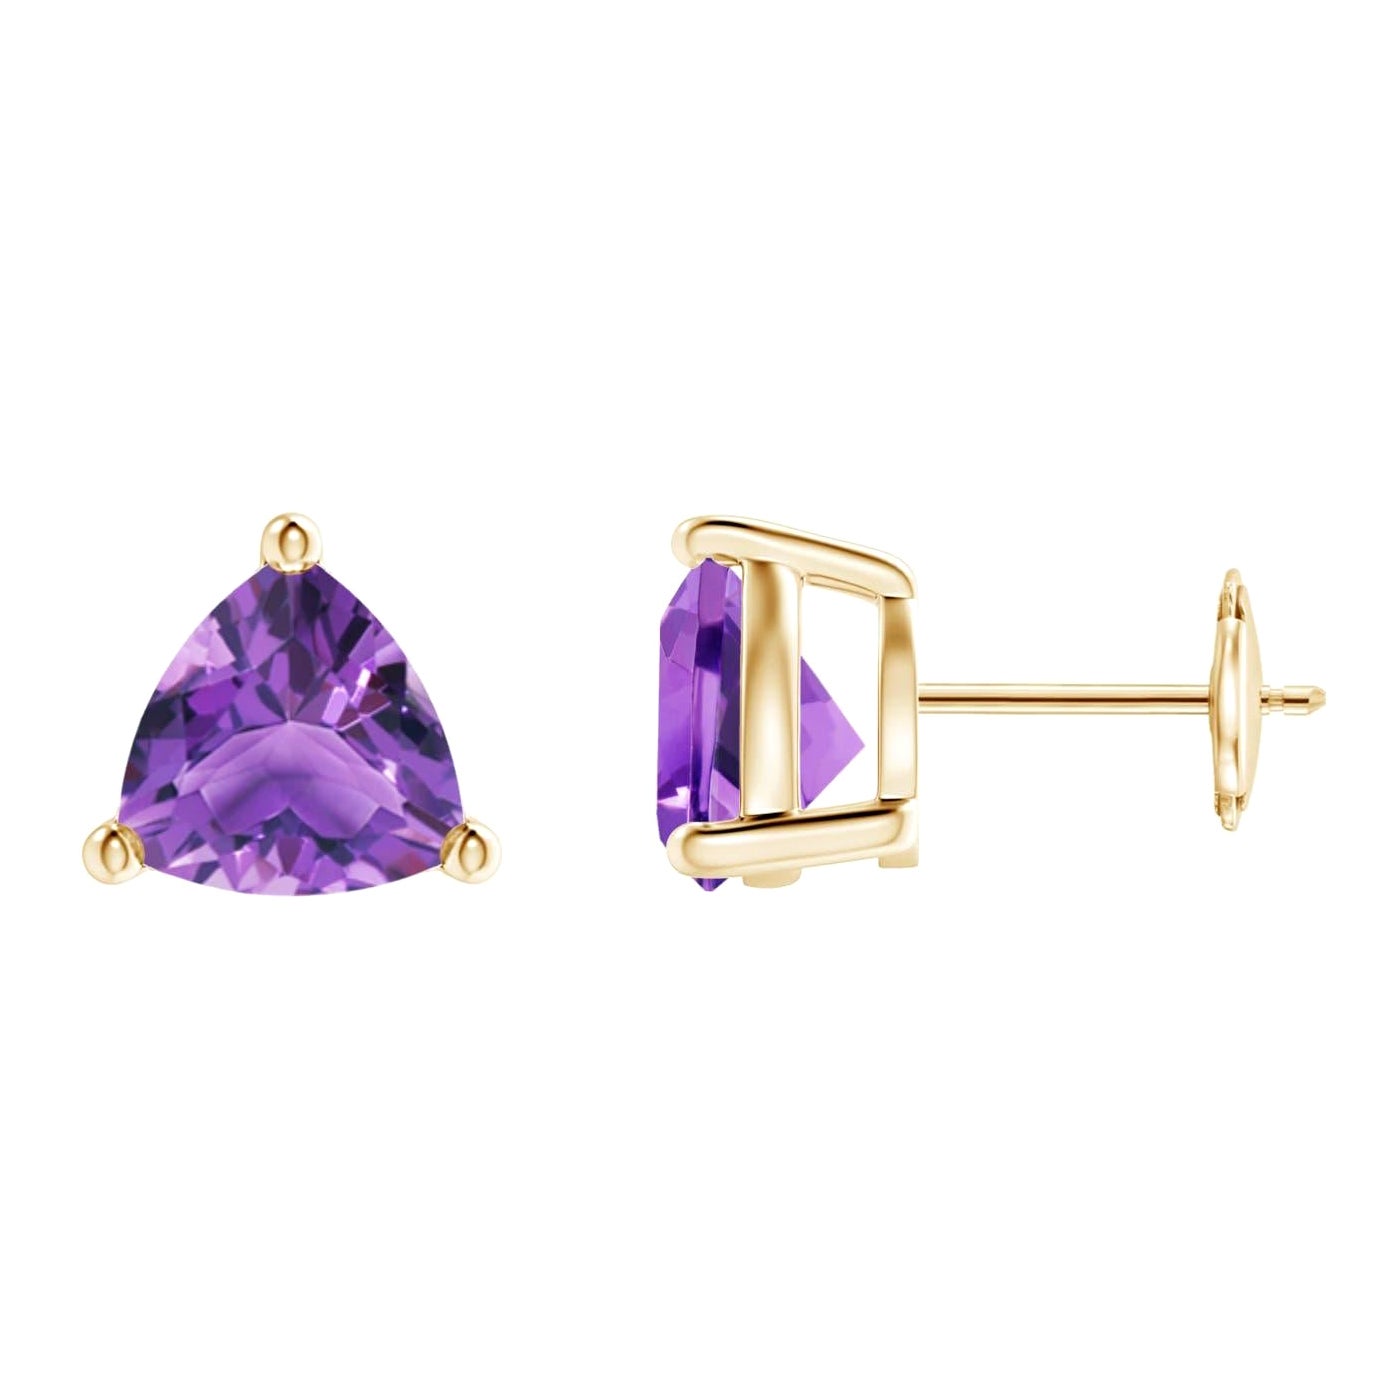 Natural Trillion 3.2ct Amethyst Stud Earrings in 14K Yellow Gold